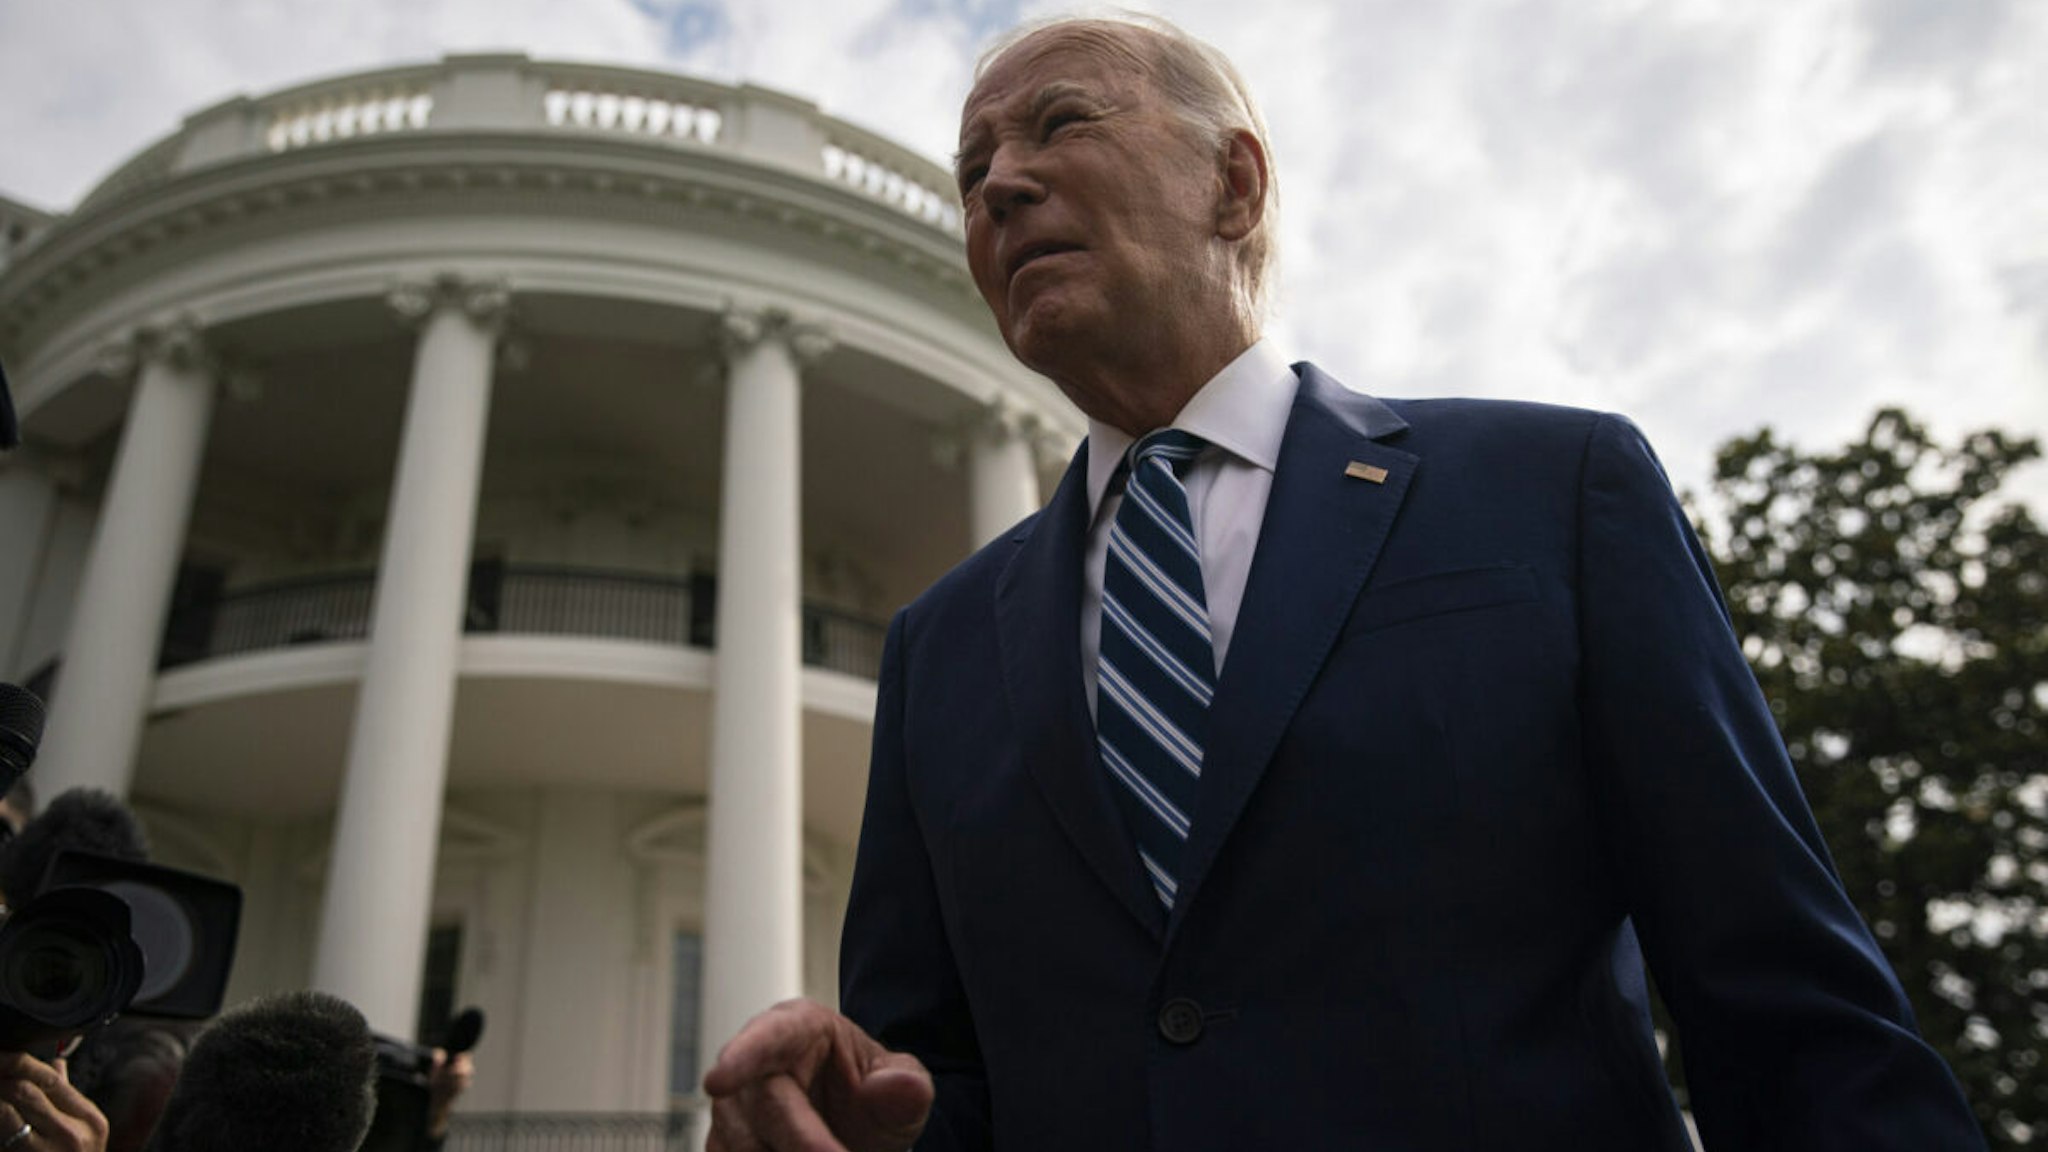 US President Joe Biden speaks to members of the media on the South Lawn of the White House before boarding Marine One in Washington, DC, US, on Wednesday, June 28, 2023.